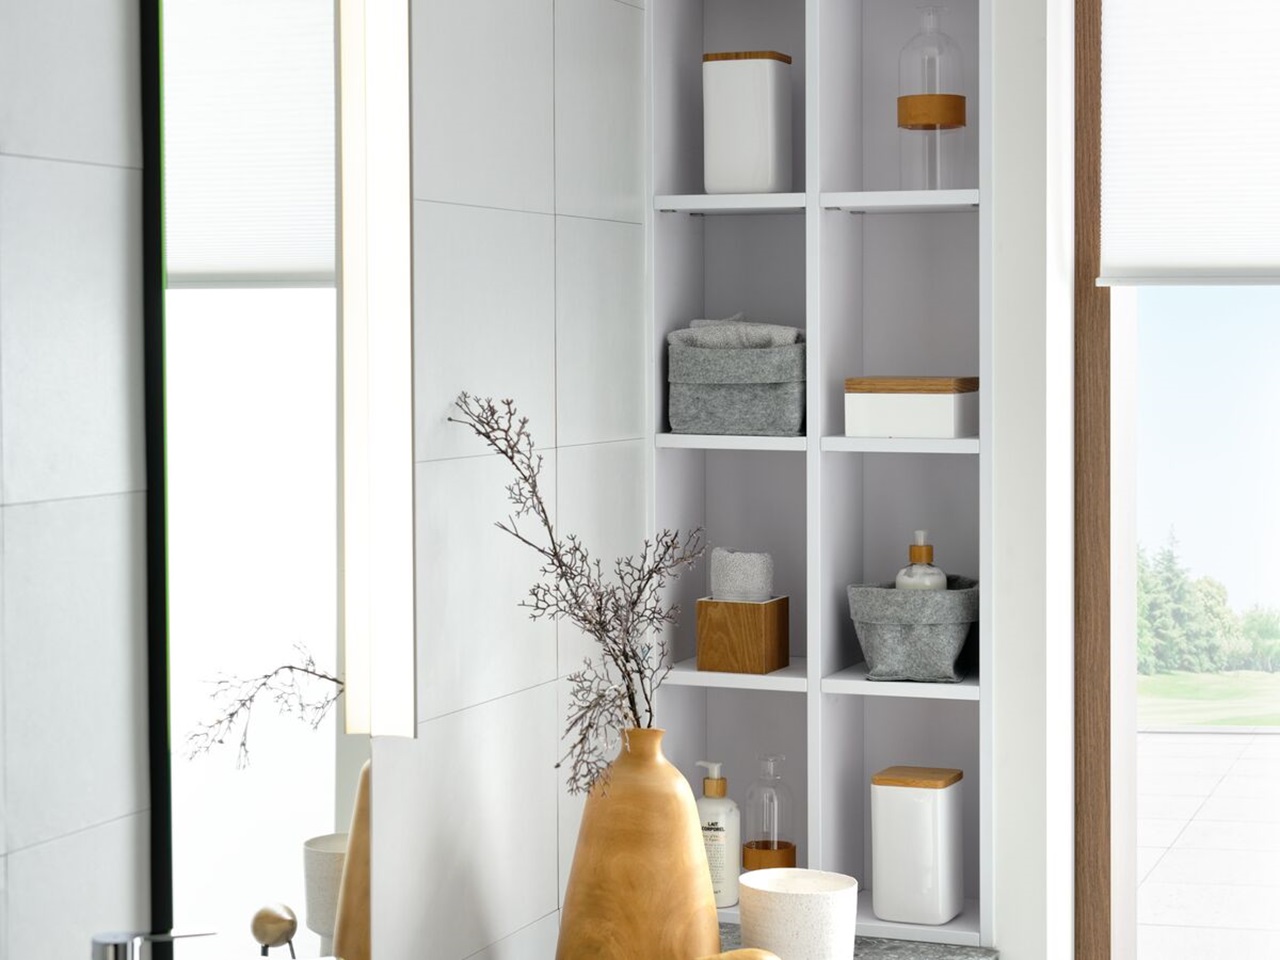 Modern bathroom unit equipped with wall-mounted storage with open niches